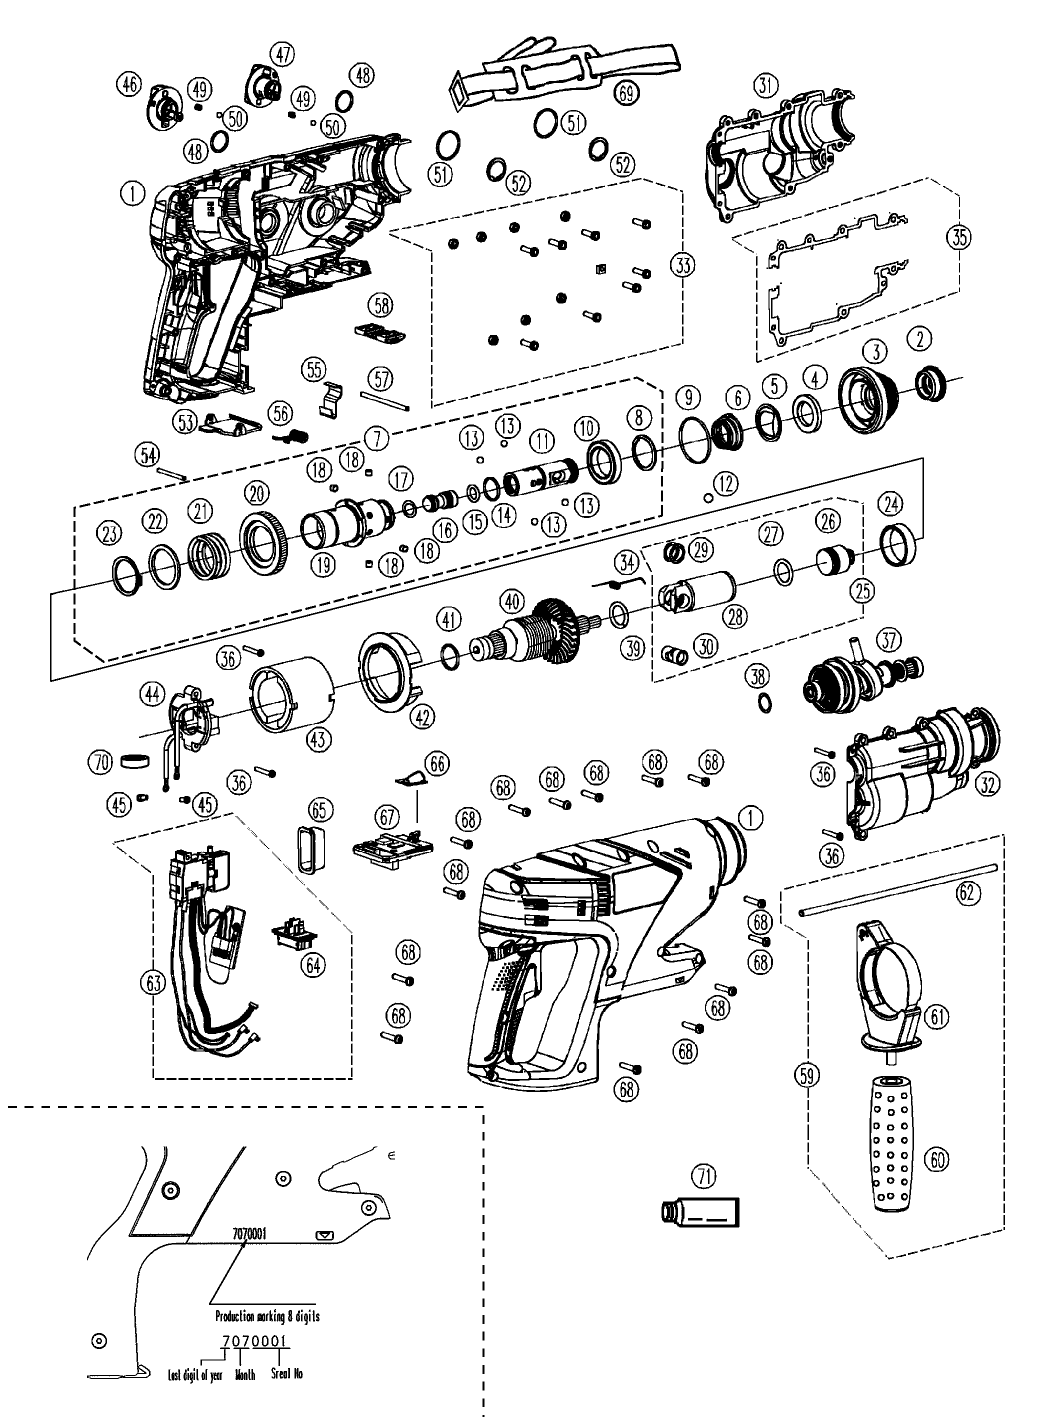 EY7880: Exploded View